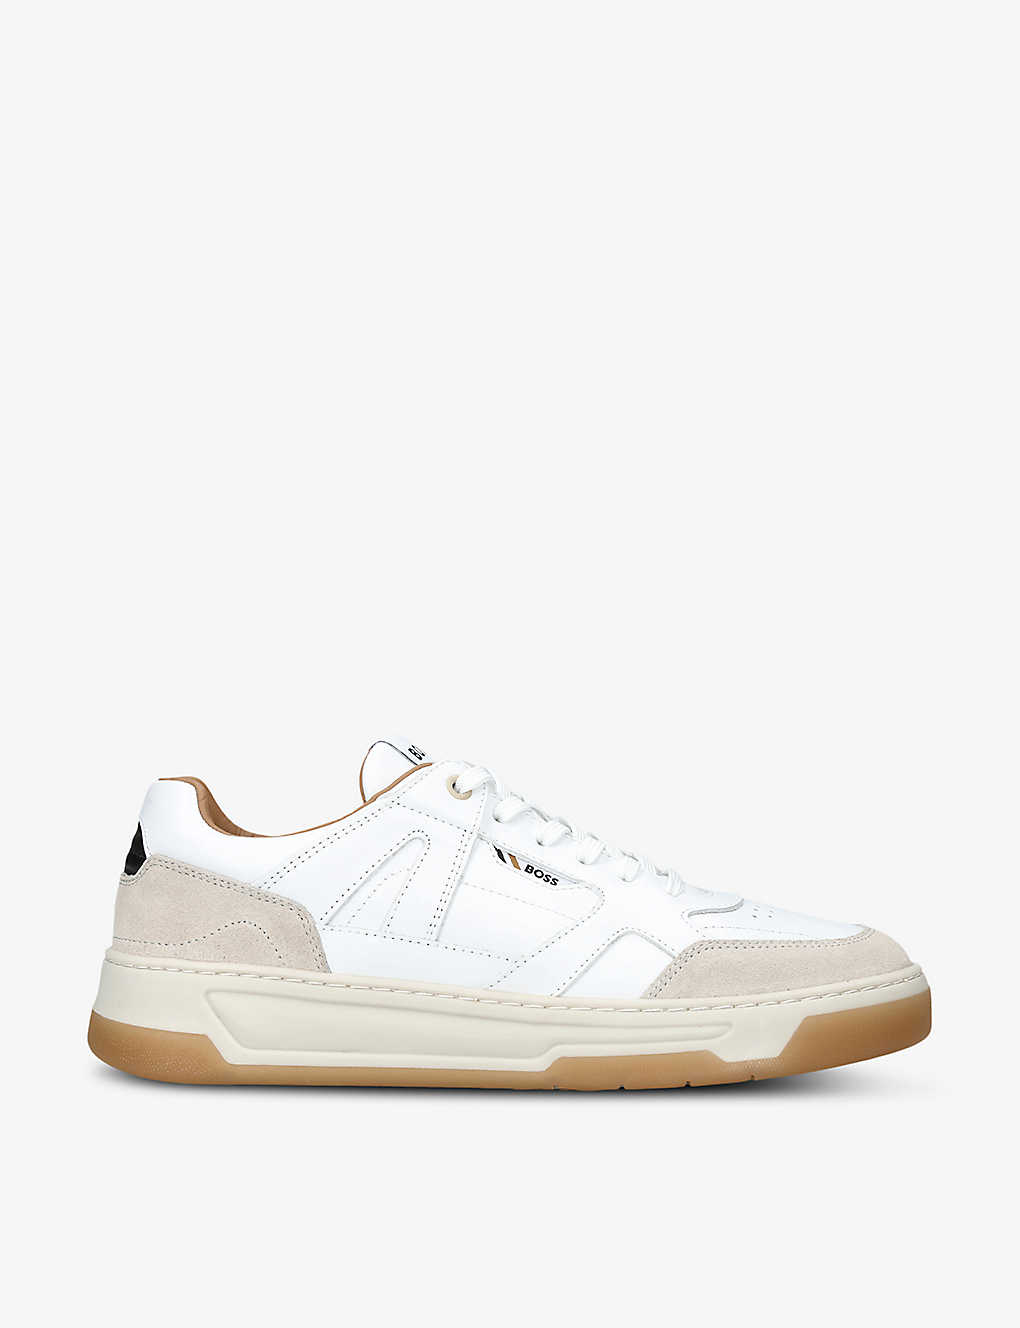 Hugo Boss Boss Mens White Baltimore Tennis Leather Low-top Trainers